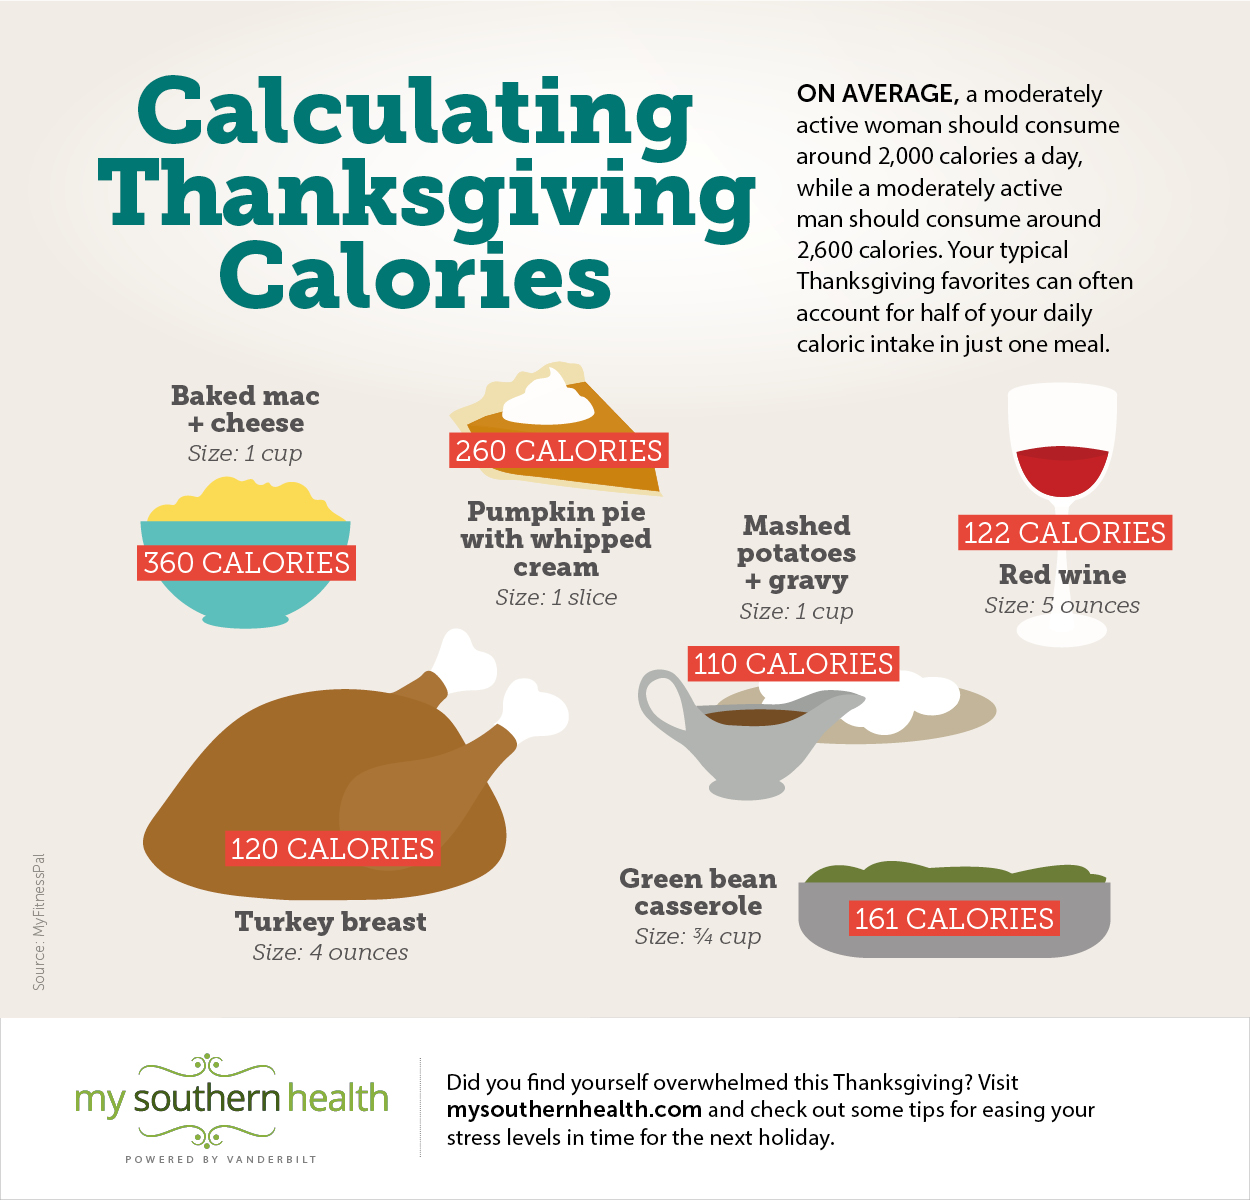 Counting calories